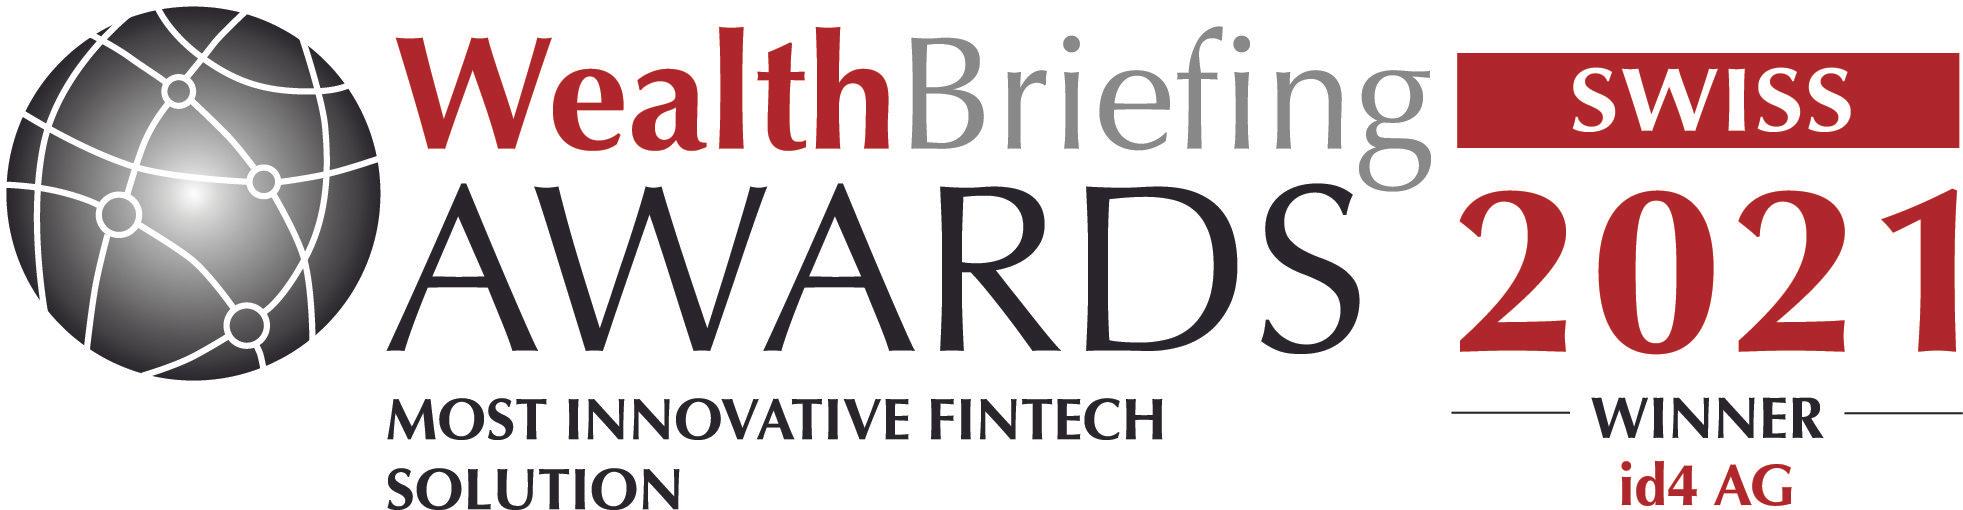 Product id4 crowned 'Most Innovative Fintech Solution' at the WealthBriefing Swiss Awards 2021 - image